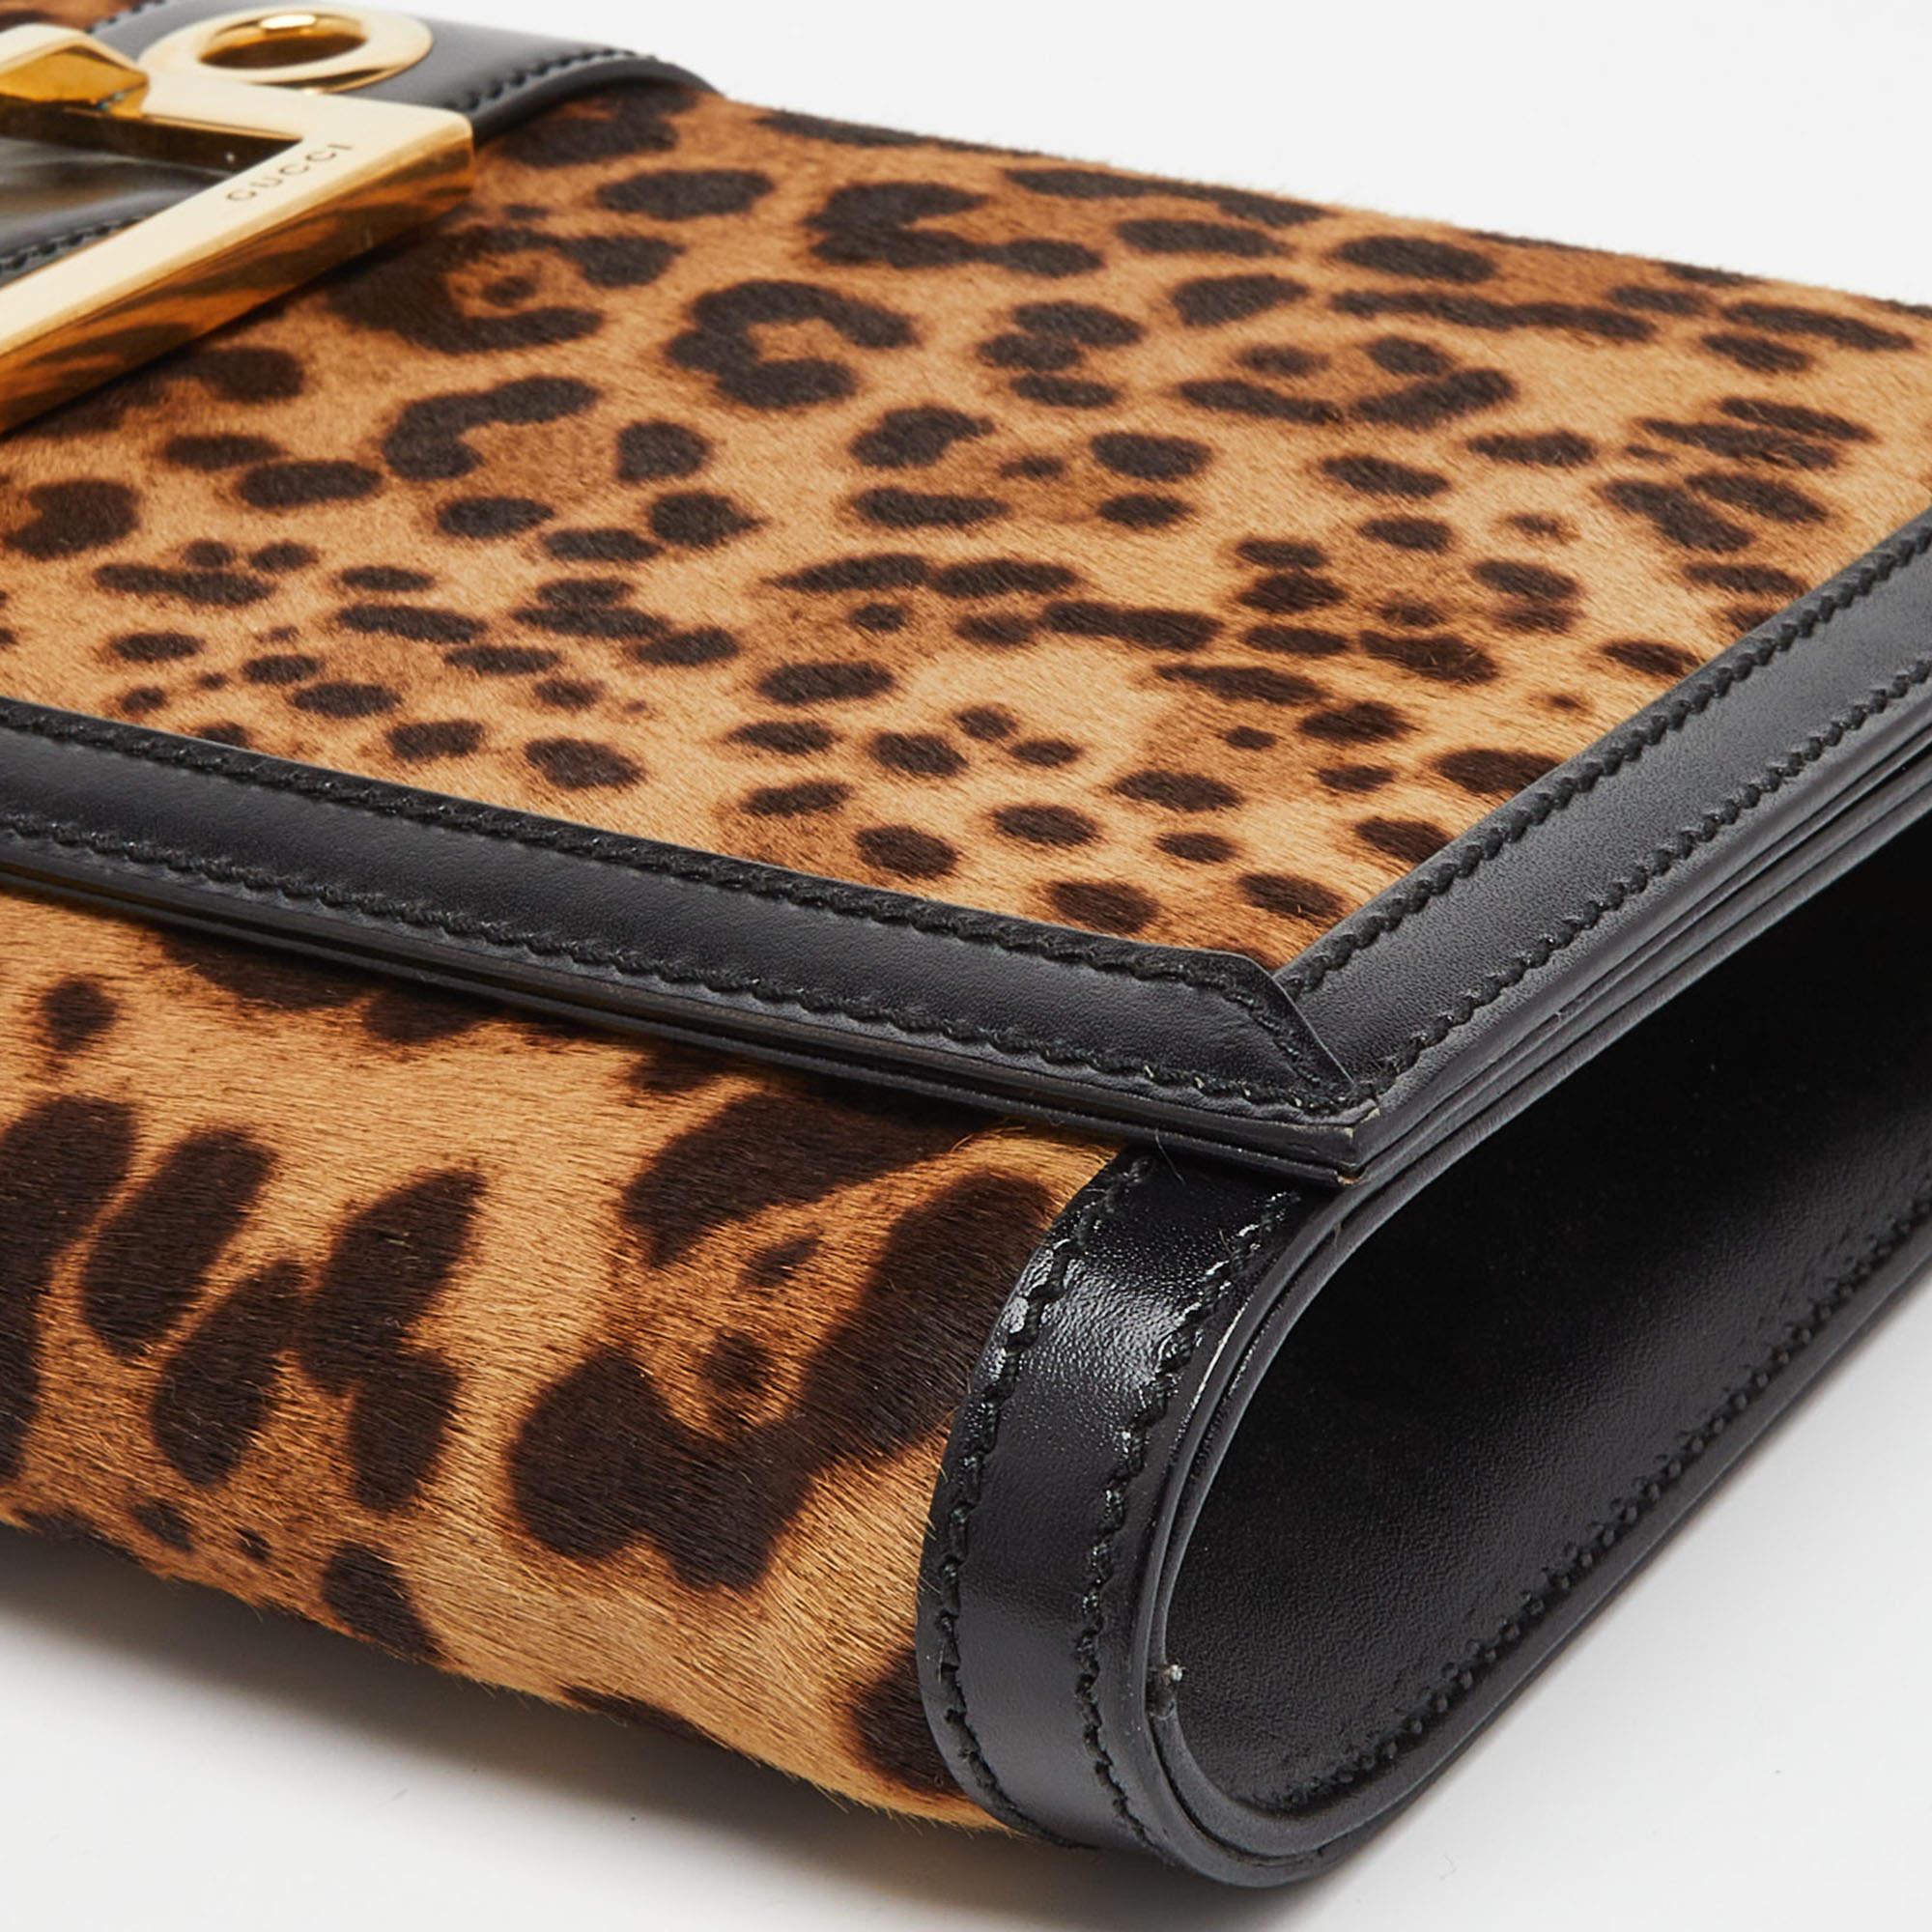 Gucci Brown/Black Leopard Print Calfhair and Leather Lady Buckle Clutch For Sale 2